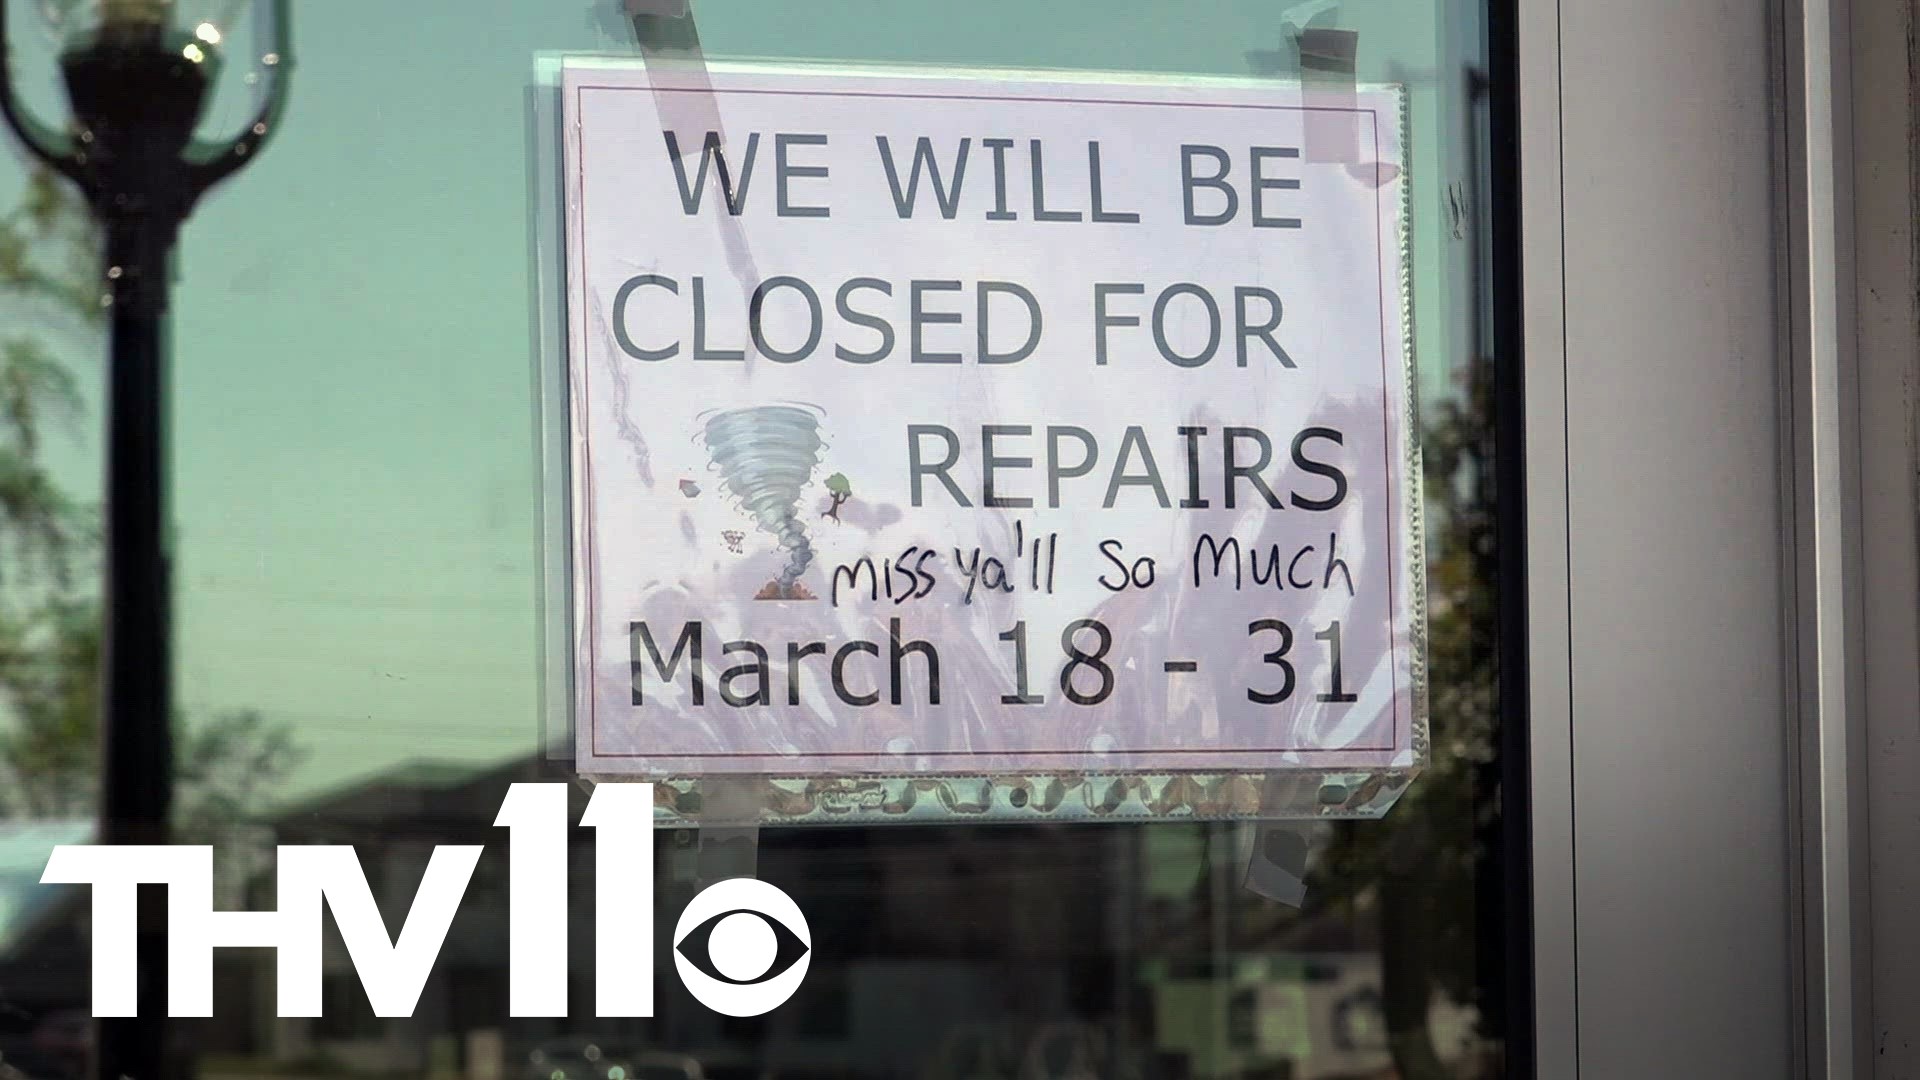 As the first anniversary of the March 31 tornado approaches, some Little Rock businesses are still dealing with the aftermath.